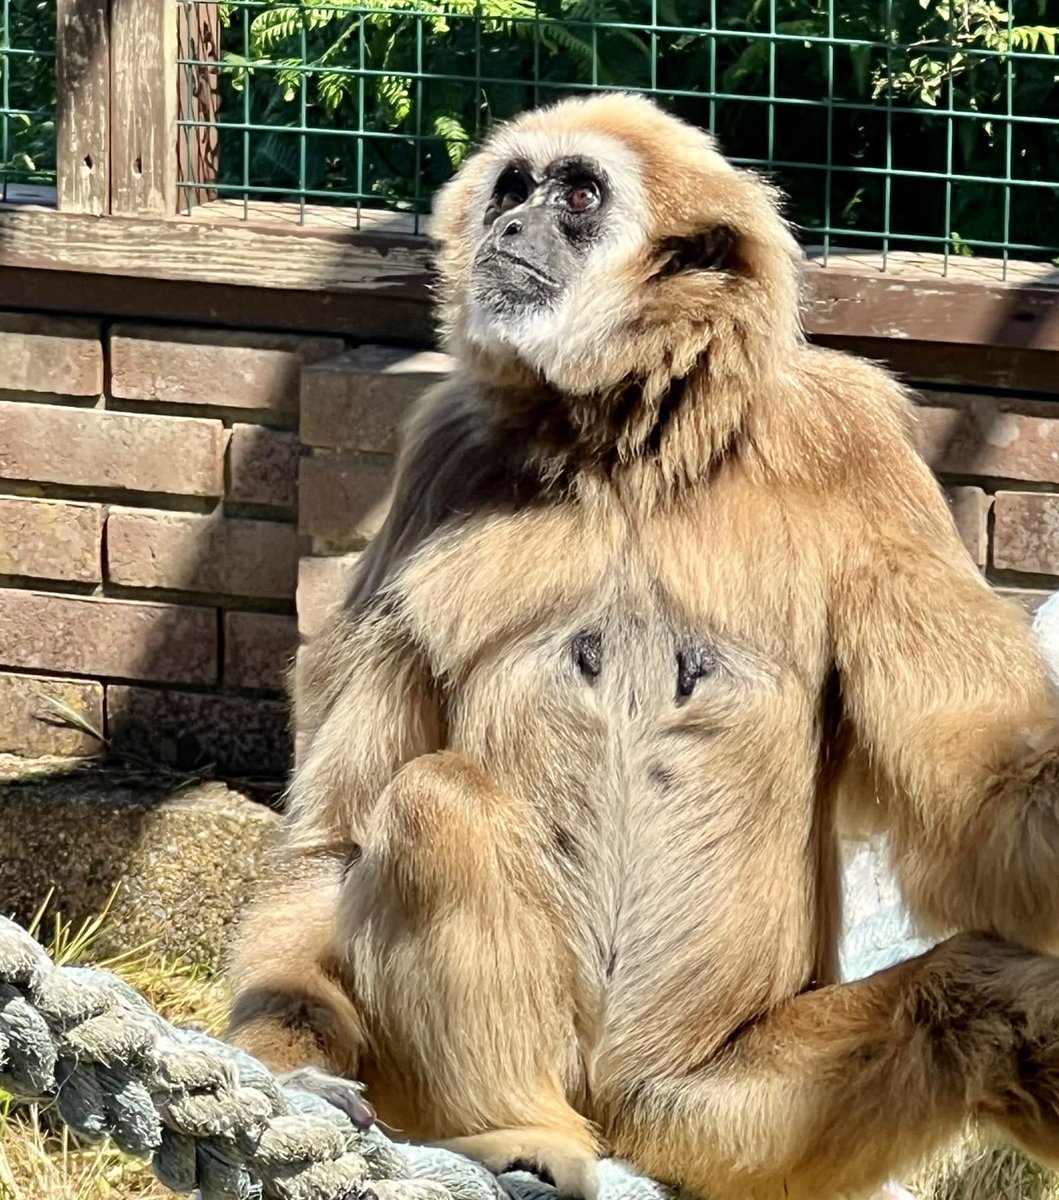 Happy 43rd birthday to our Golden girl, Rasmaya!!🎈🎂🥳

Our queen of swing has had a lovely day celebrating her special day with birthday cakes, treats, visitors, presents and lots of birthday “Whoops”!!🎵

Happy birthday gorgeous girl 💛

#gibbon #birthdaygirl #primatesanctuary